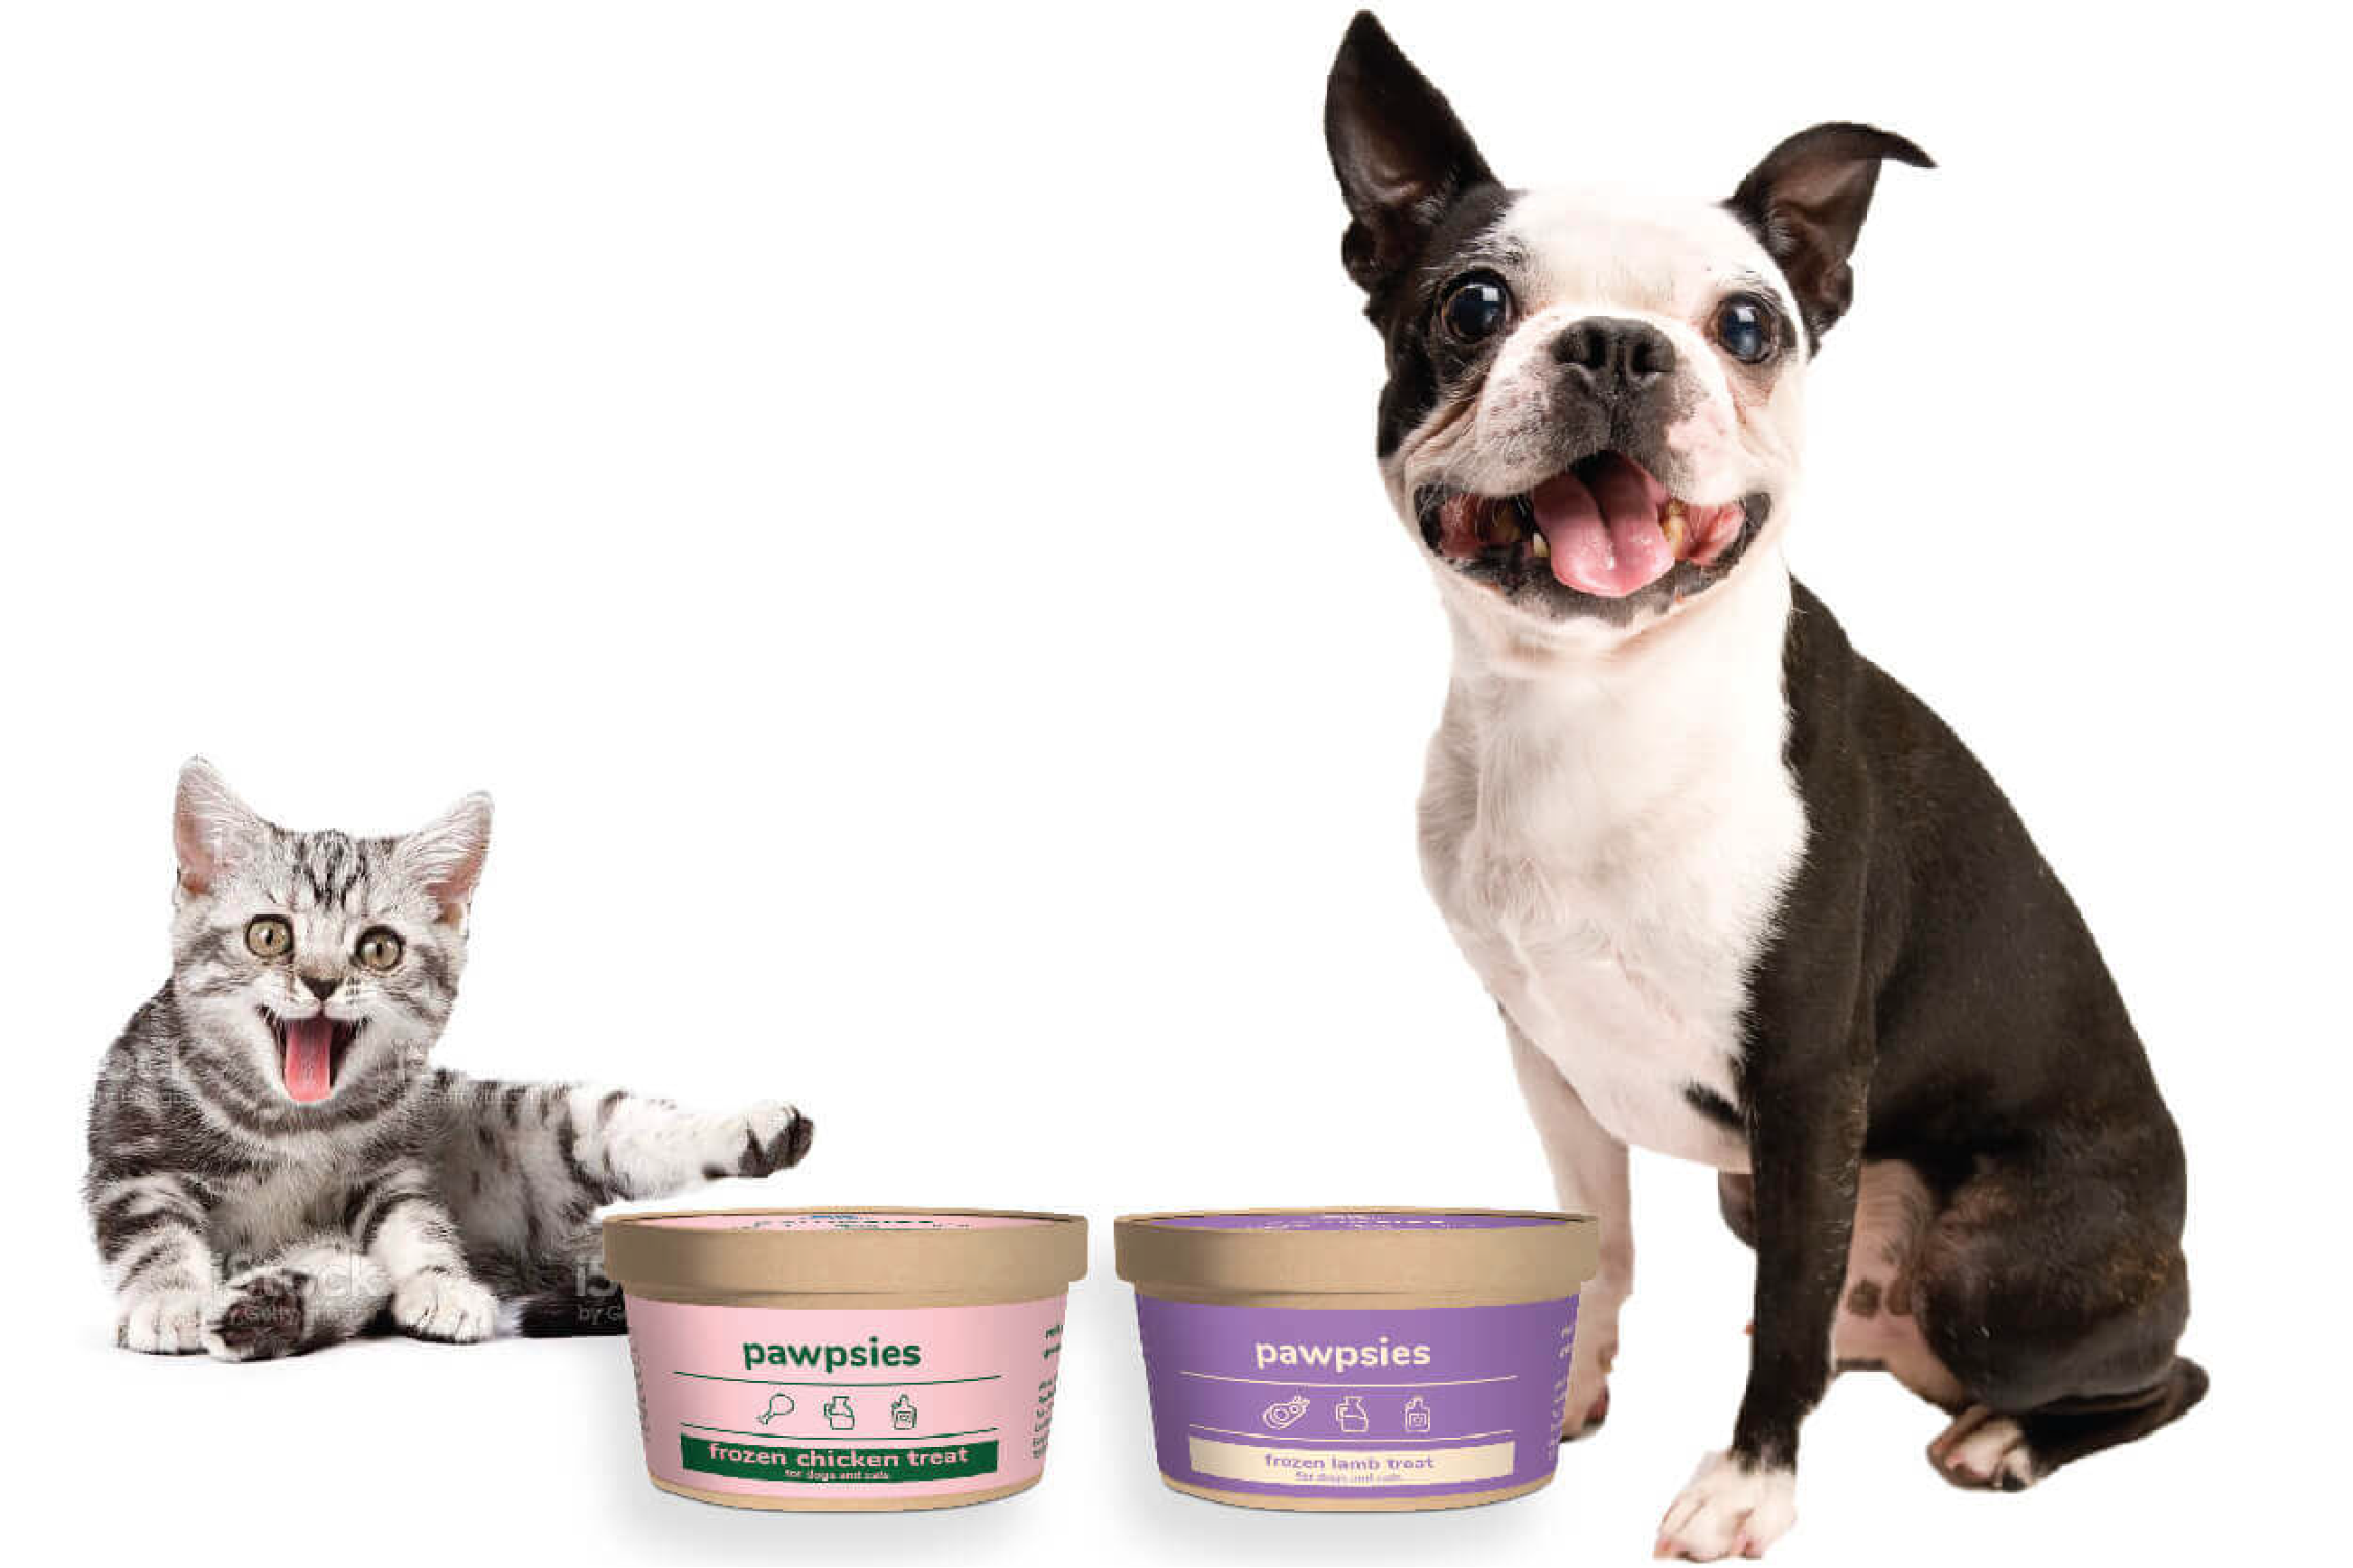 pawpsies product banner | Pawfectly Made